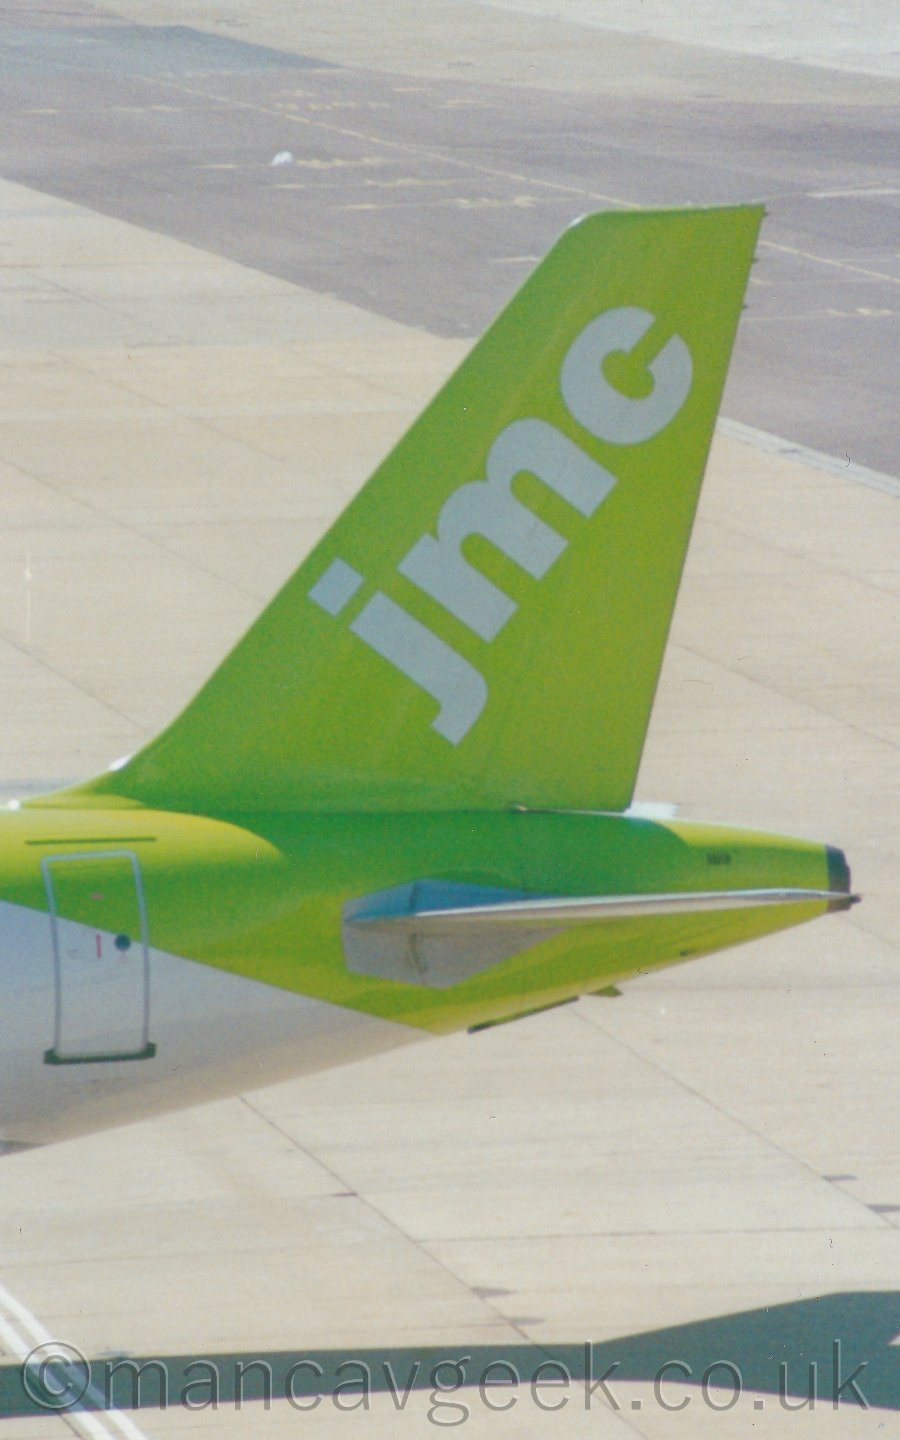 Closeup of the tail of a jet airliner parked facing to the left. The plane's body is mostly white, with a neon green rear fuselage and tail, with diagonal white "JMC" titles on the tail. In the background, acres of tarmac apron space fill the rest of the frame.